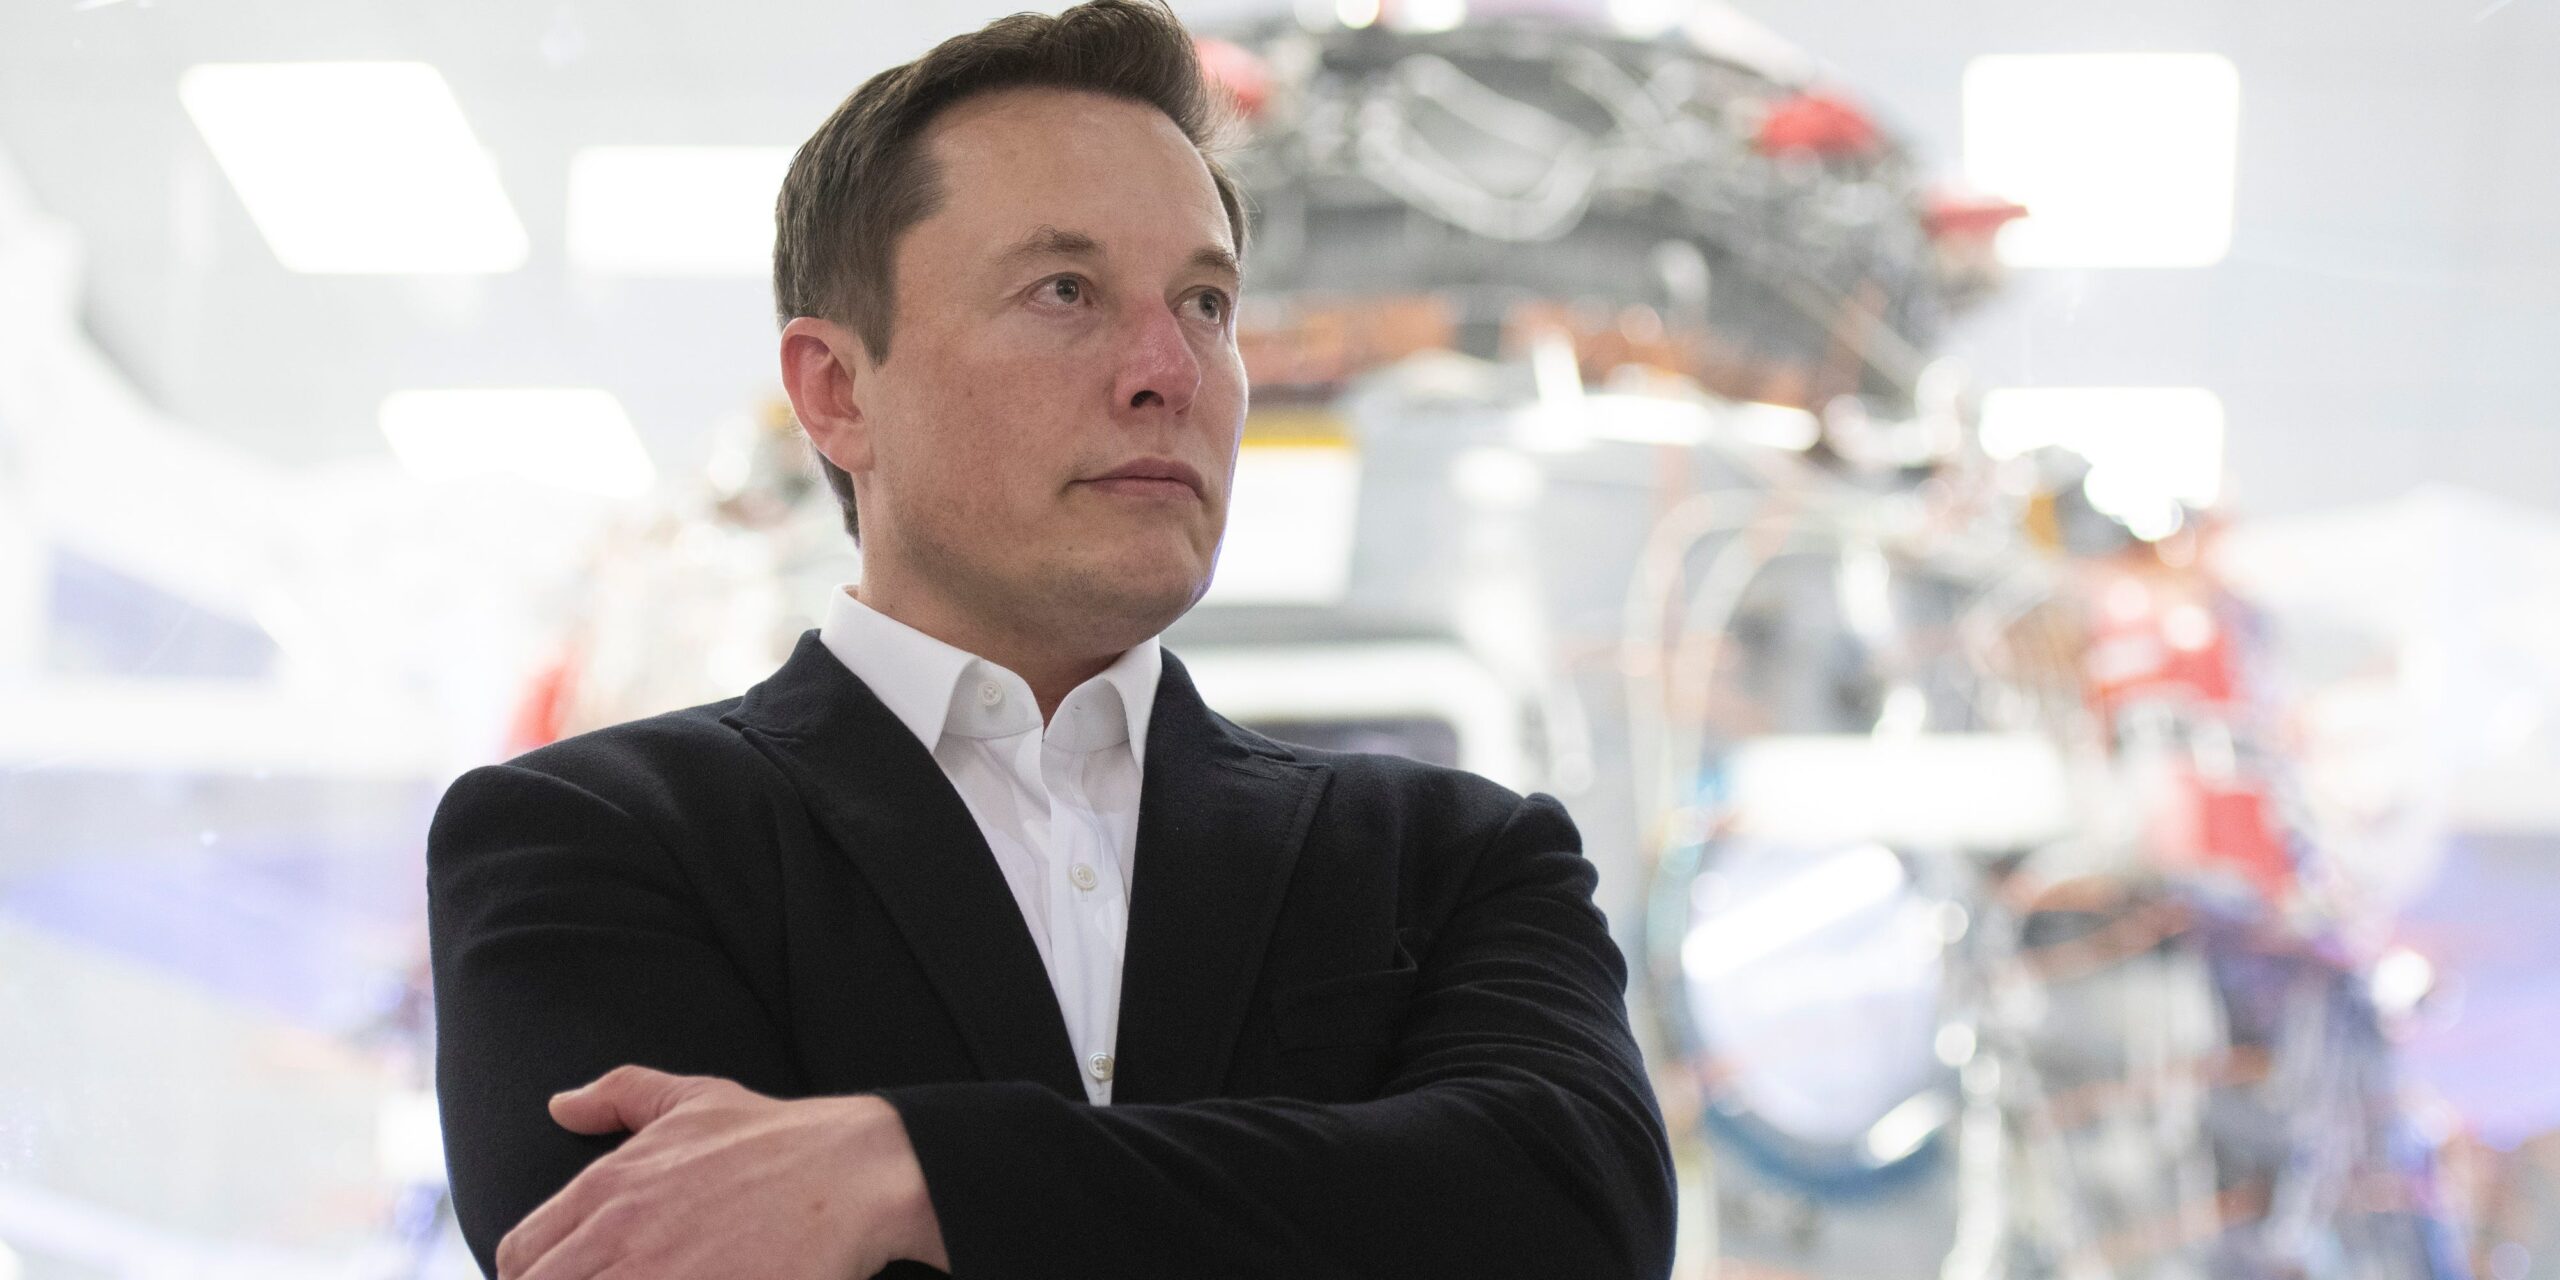 Elon Musk says pandemic supply-chain issues and a global microchip shortage resulted in ‘insane difficulties’ for Tesla